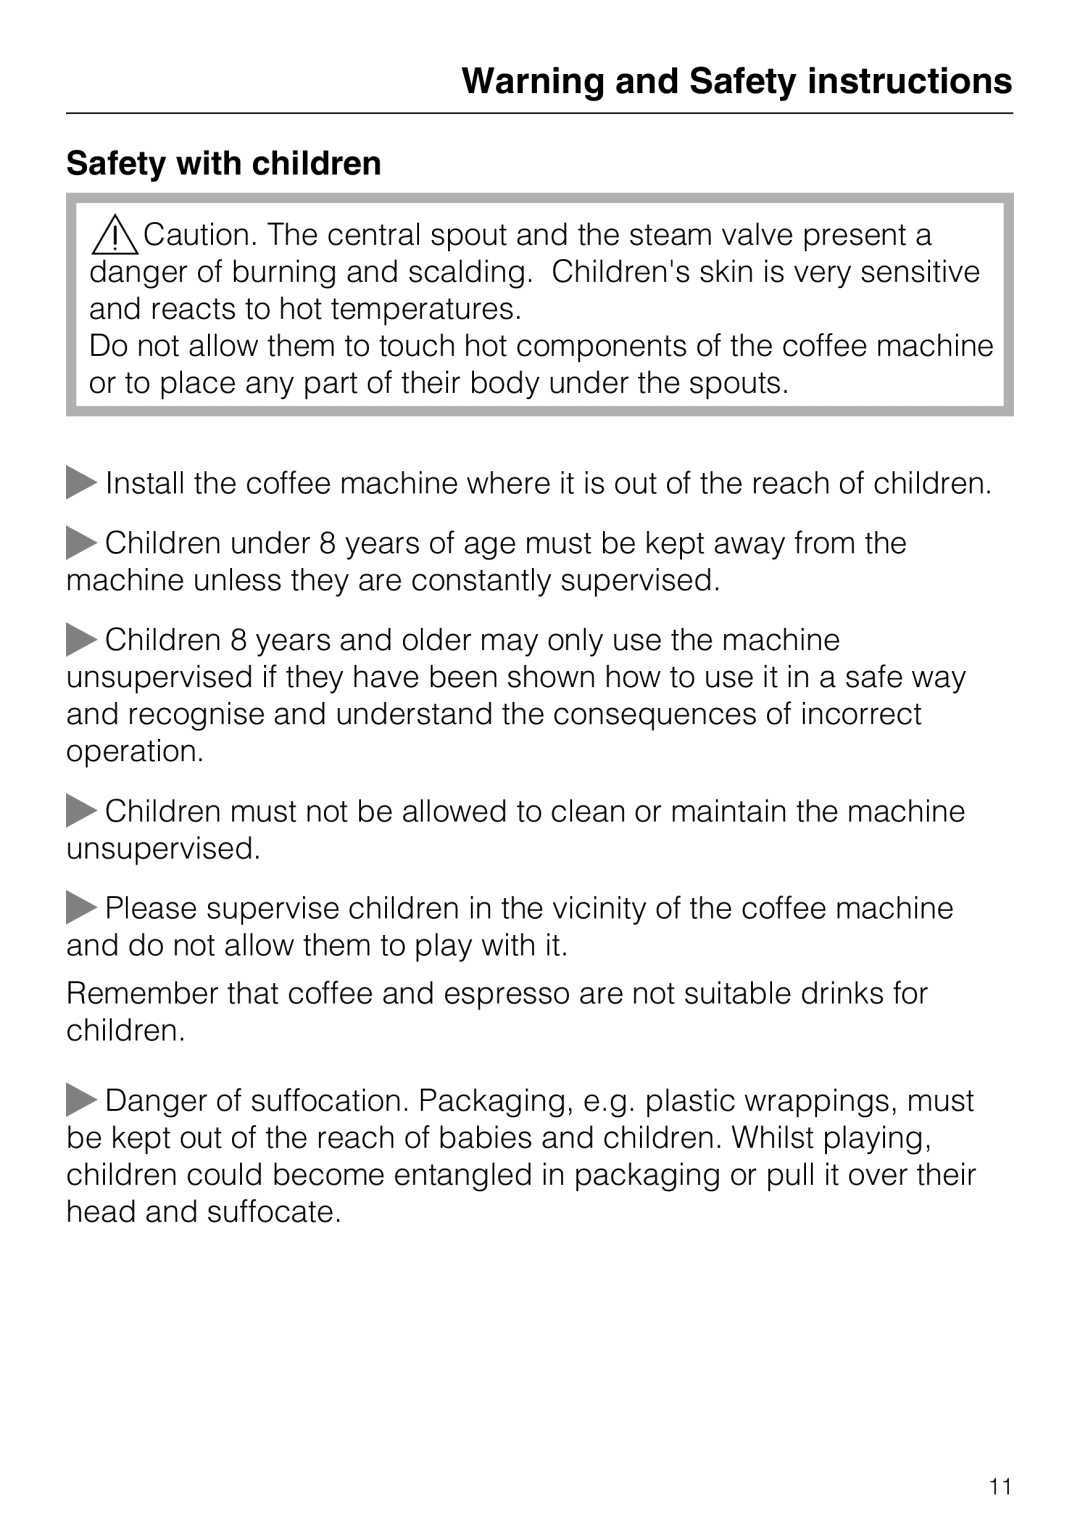 Miele CVA 6431 (C) installation instructions Safety with children, Warning and Safety instructions 